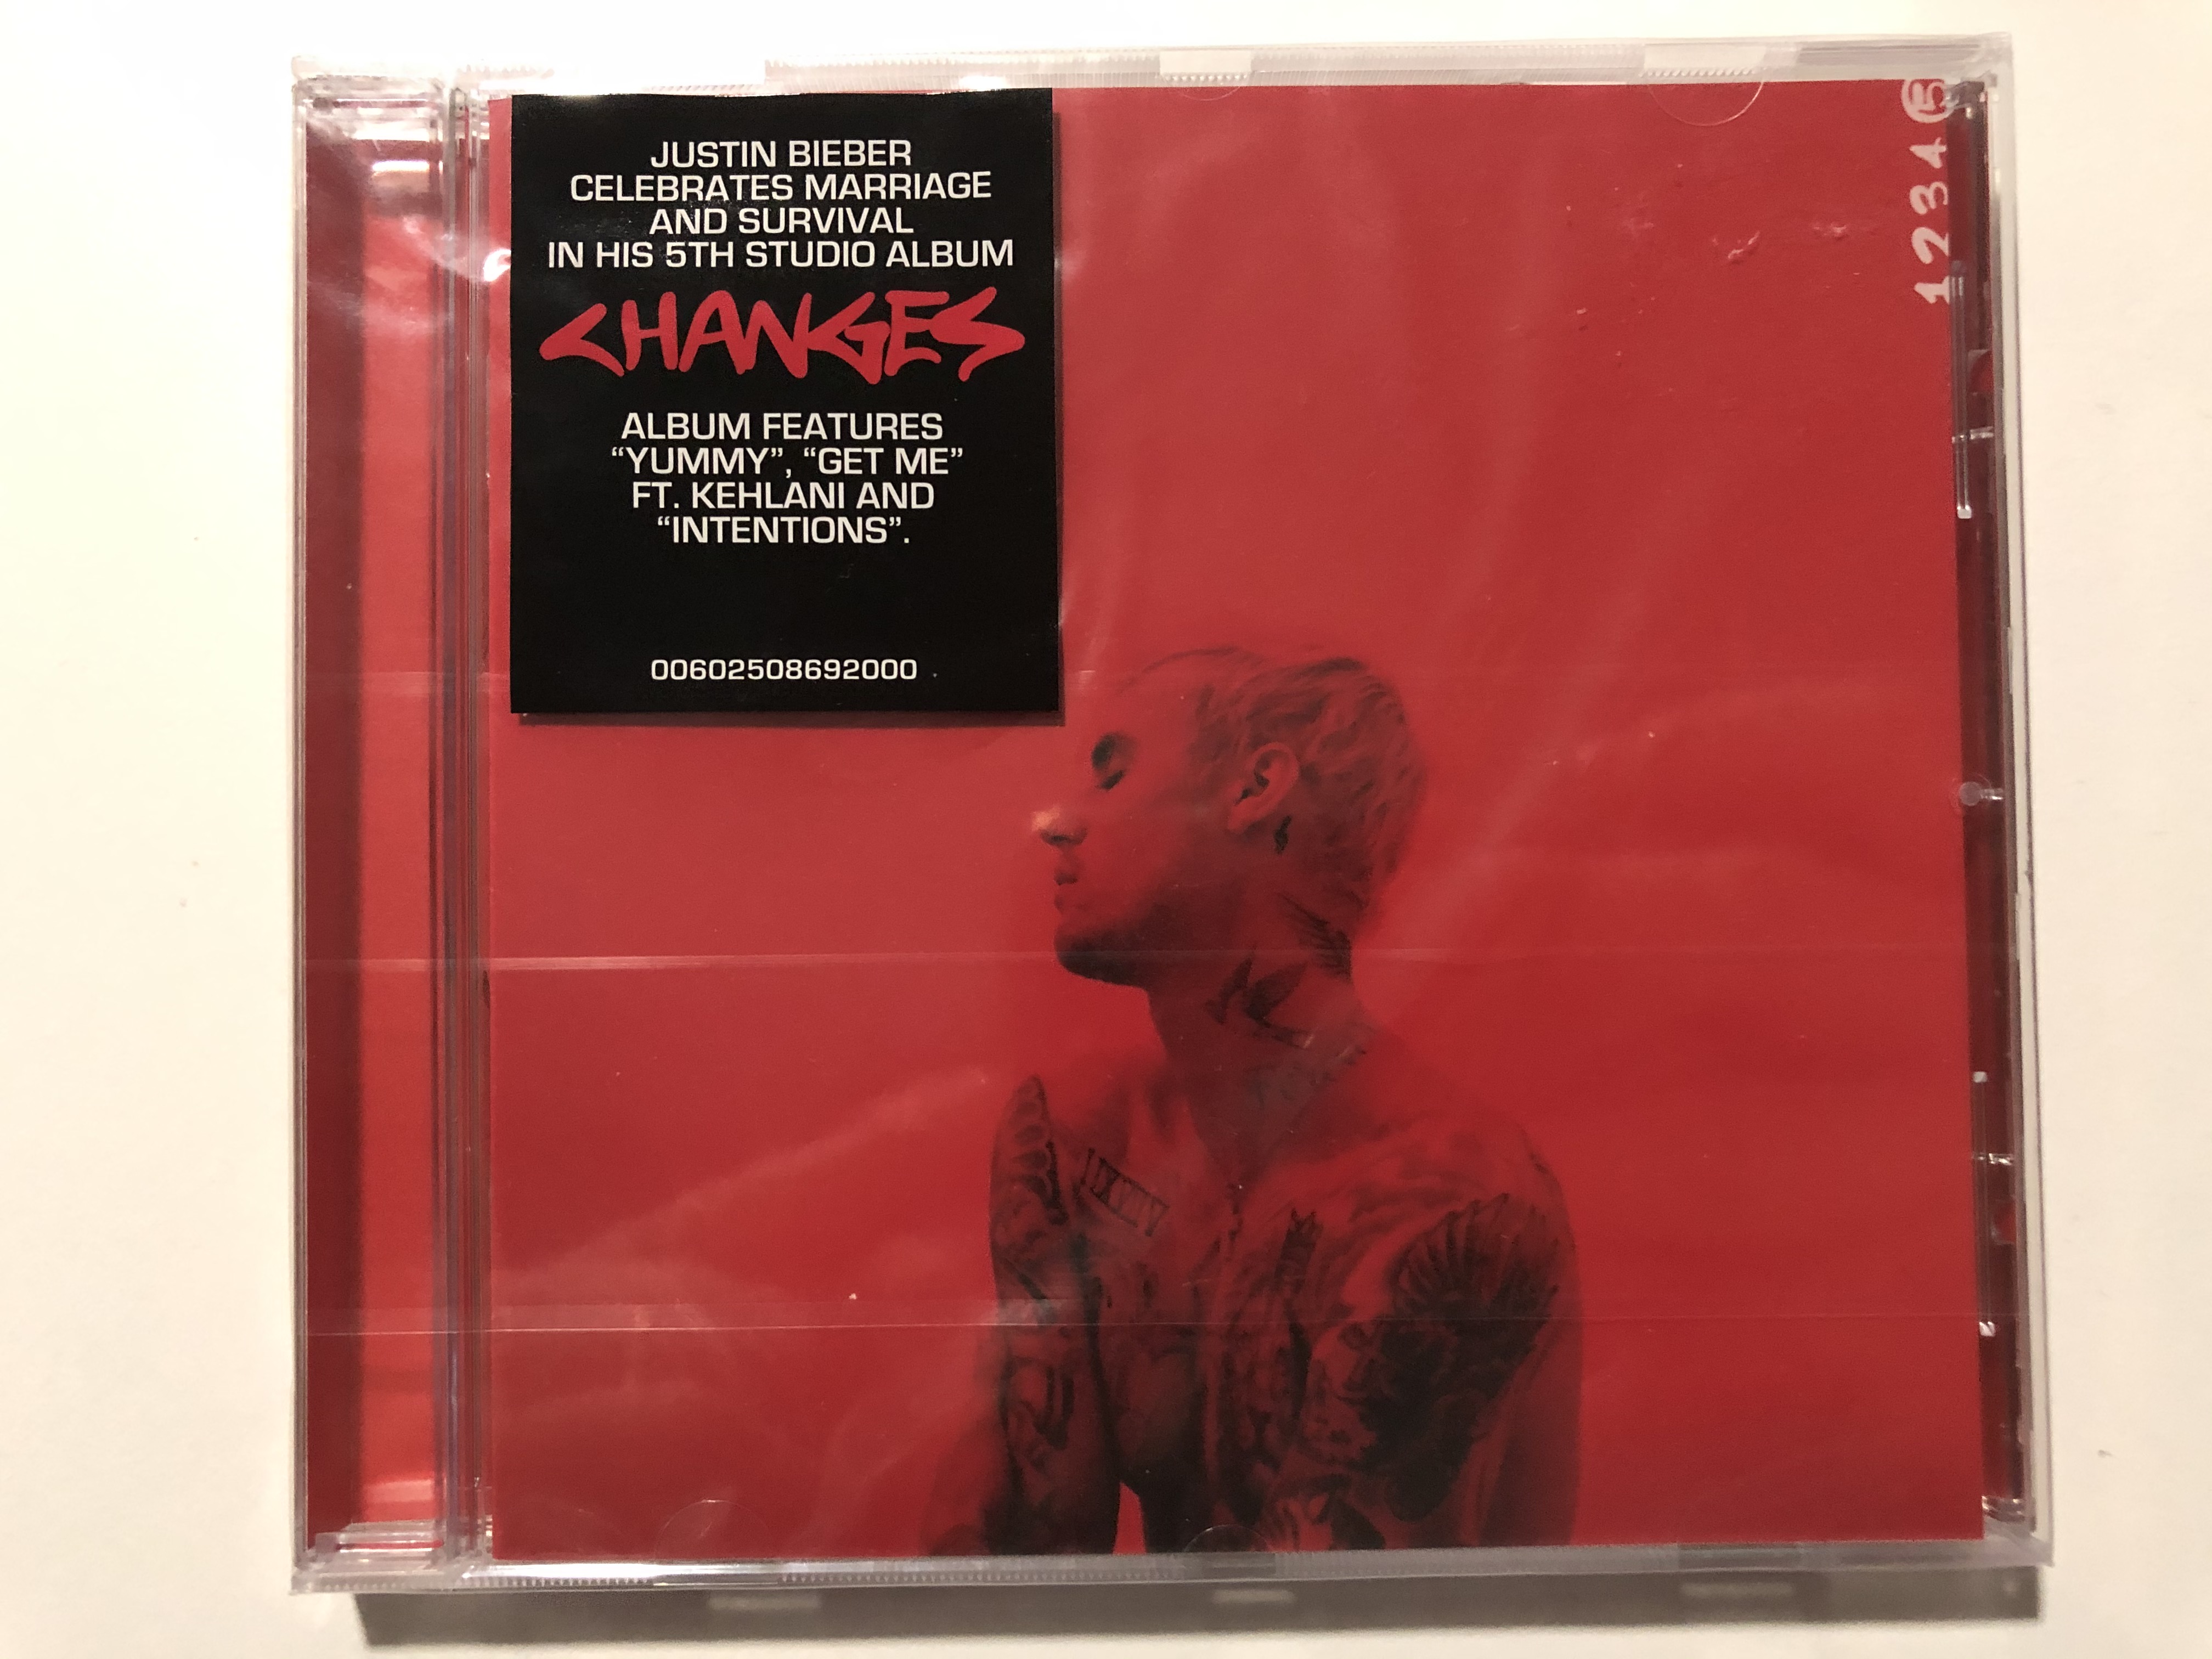 justin-bieber-celebrates-marriage-and-survival-in-his-5th-studio-album-changes-album-features-yummy-get-me-ft.-kehlani-and-intentions-def-jam-recordings-audio-cd-2020-006025-1-.jpg